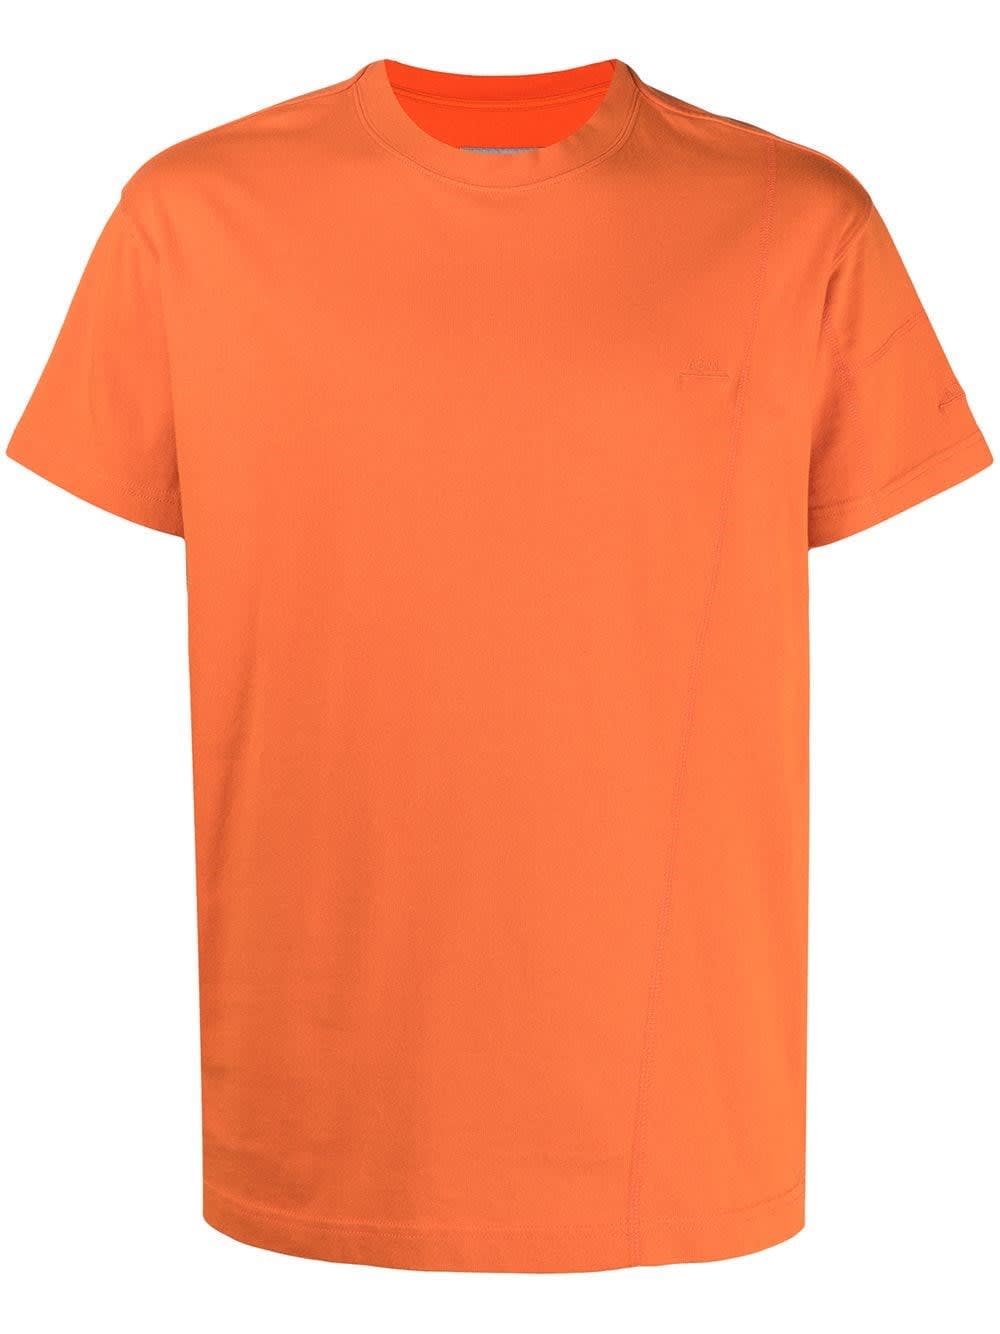 A-COLD-WALL* BASIC ORANGE COTTON T-SHIRT WITH LOGO,11806097